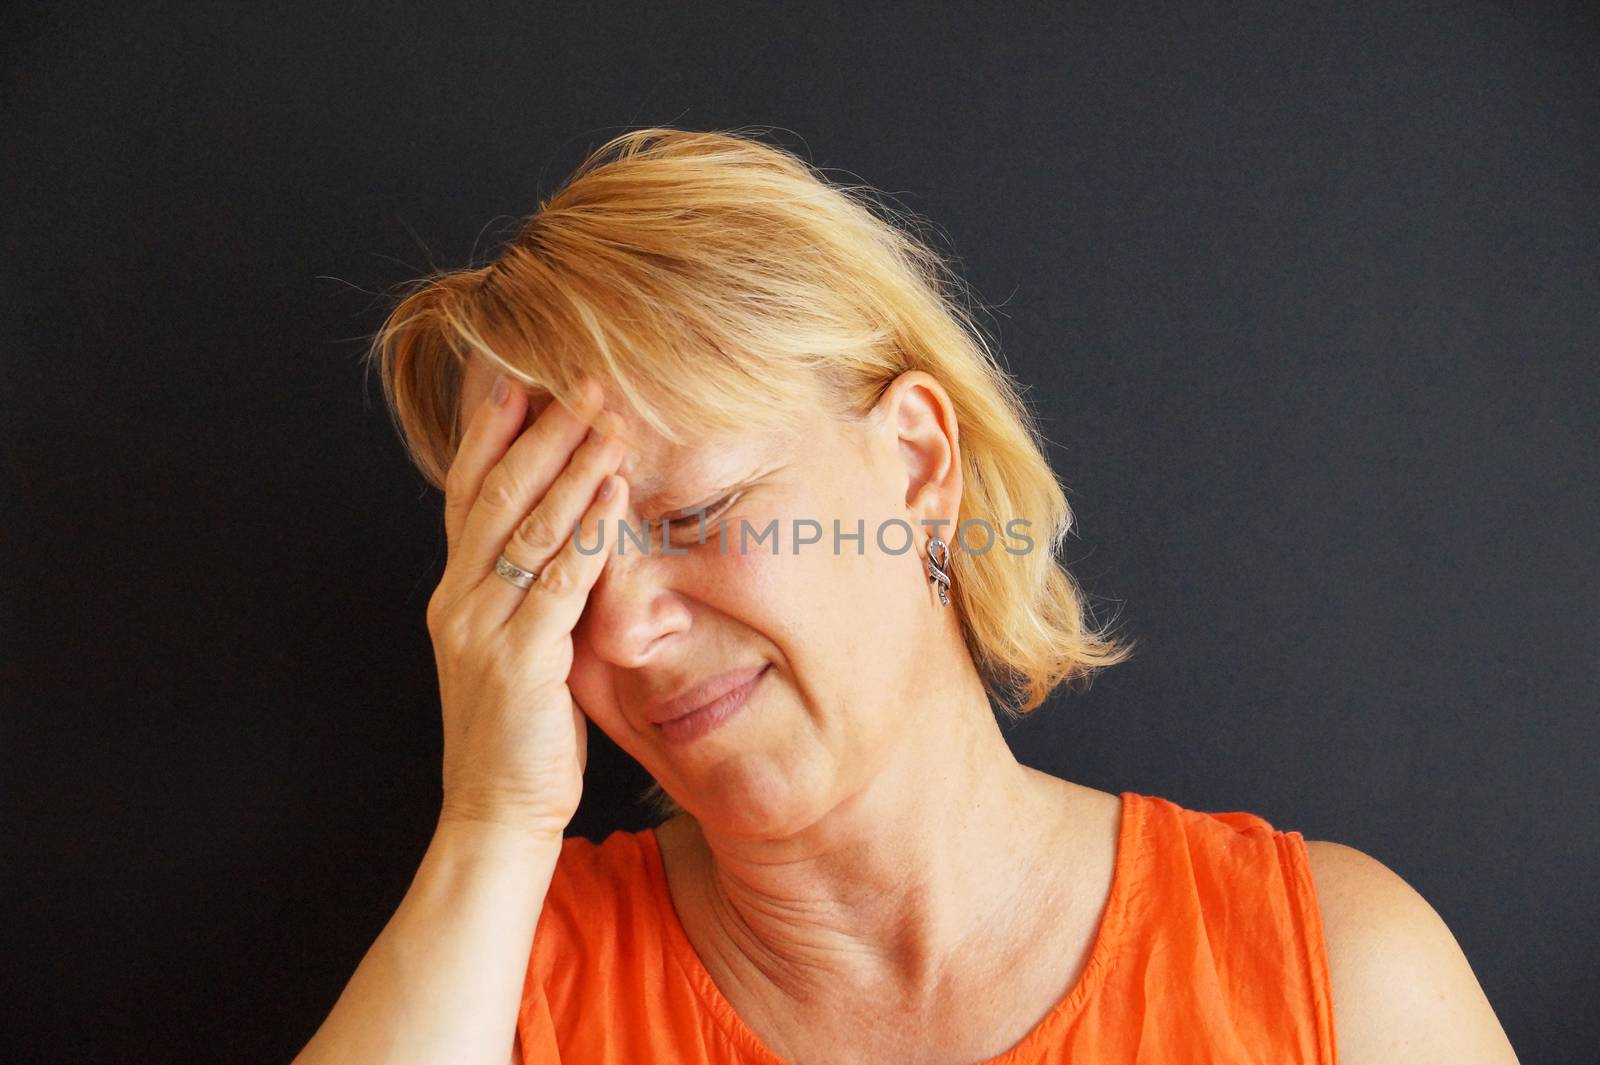 unhappy woman holding her head with her hand, portrait on black background.